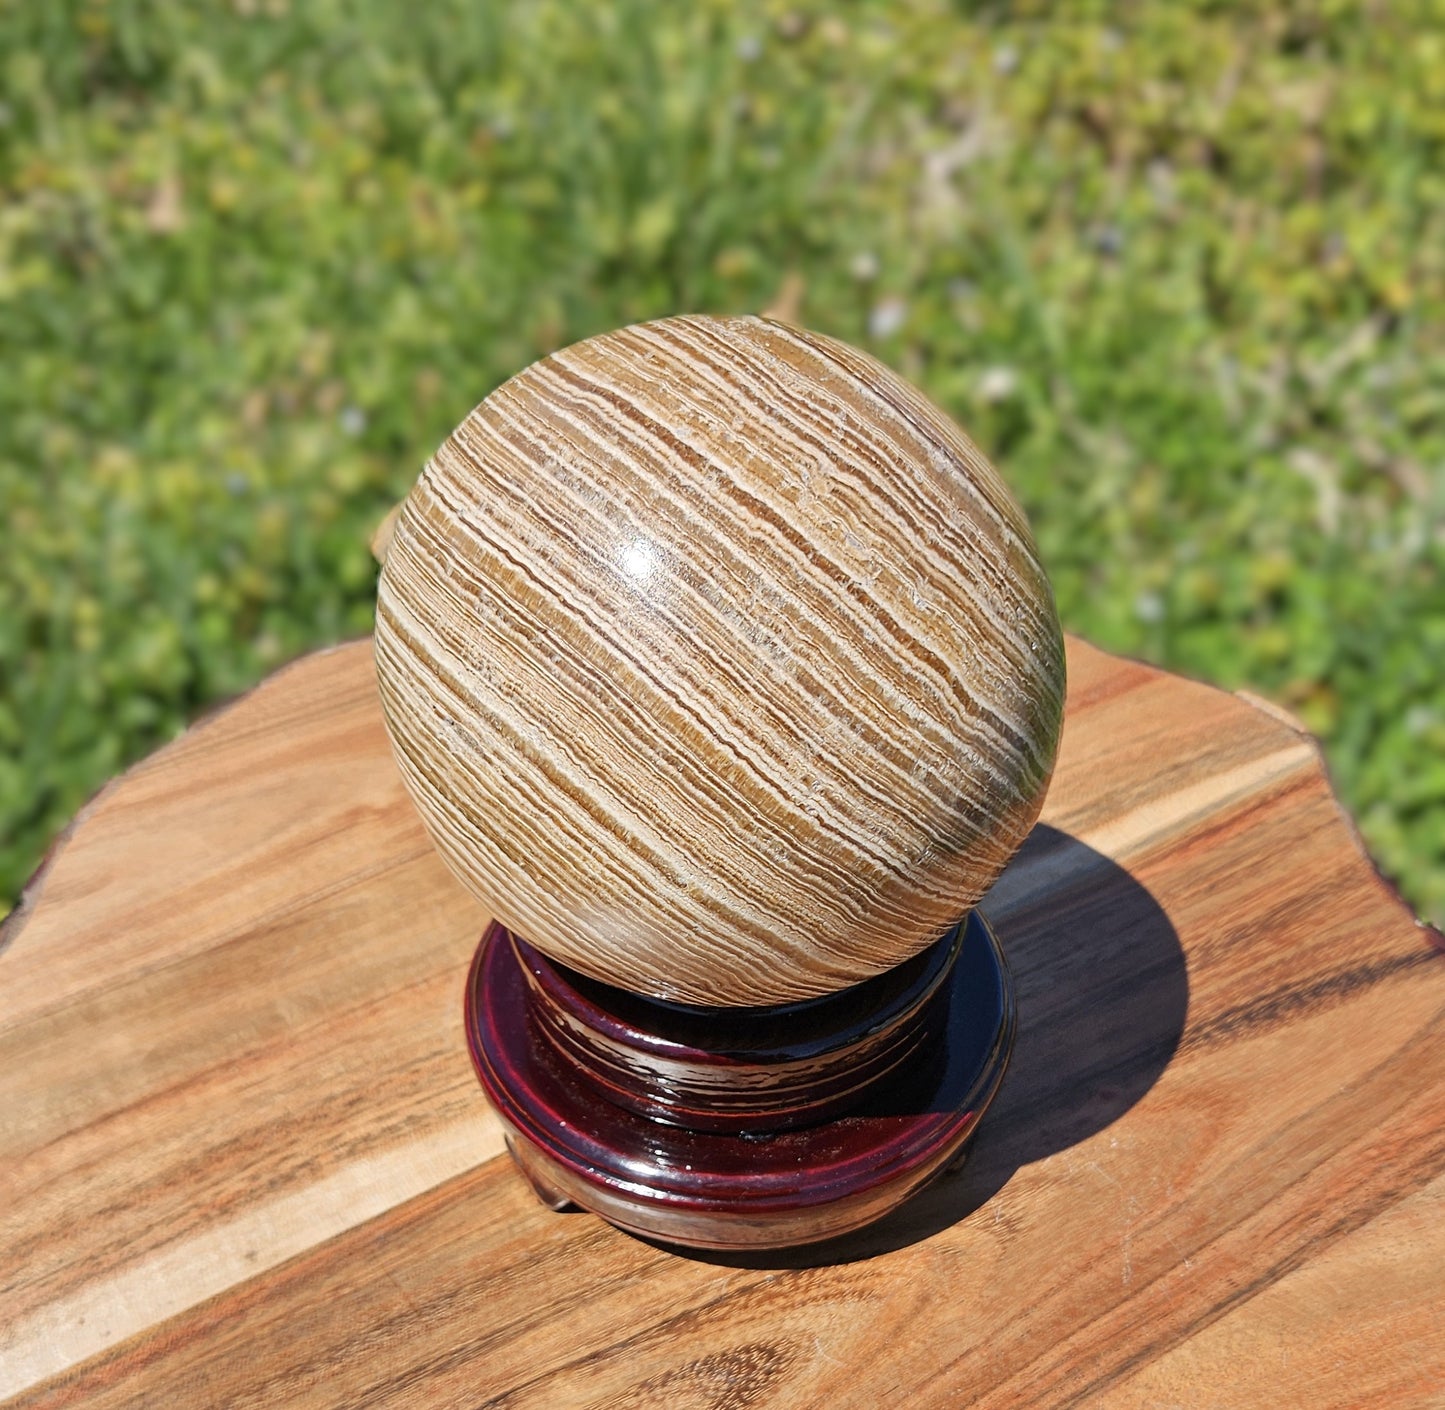 Banded Aragonite Sphere - Statement Piece over 100mm Free stand included